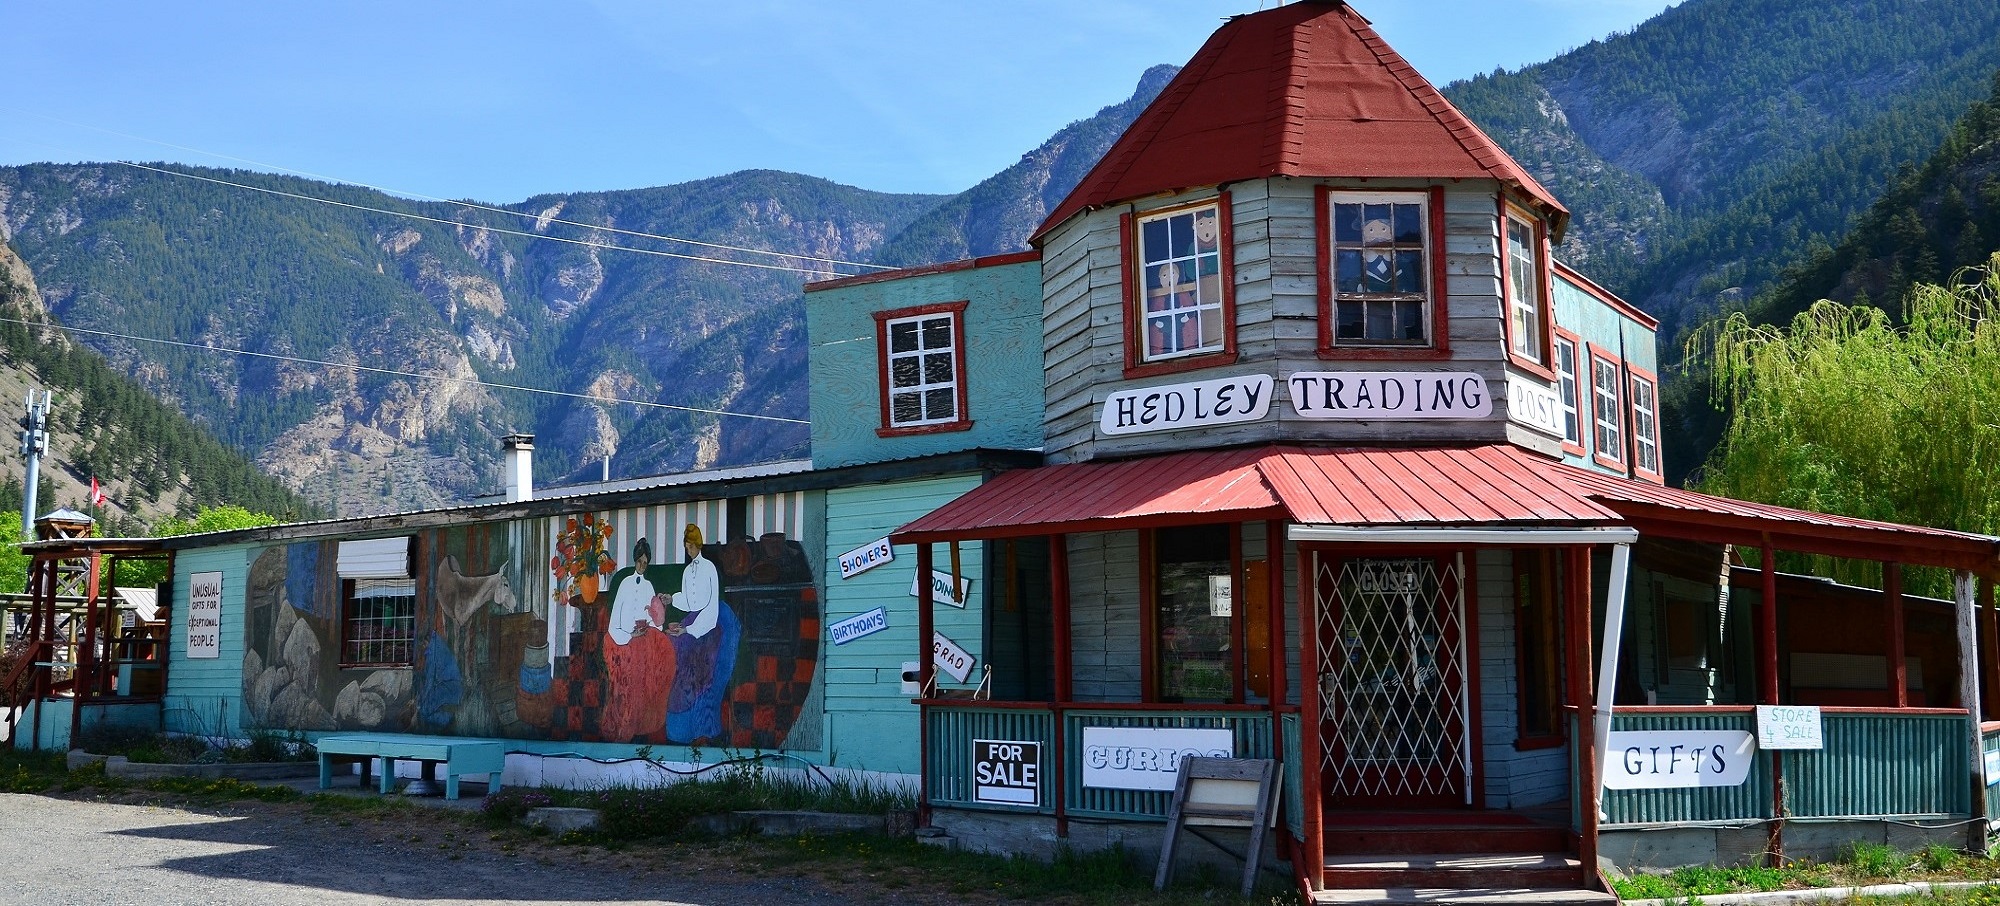 Take a Break along the Crowsnest Highway 3 to Osoyoos, British Columbia